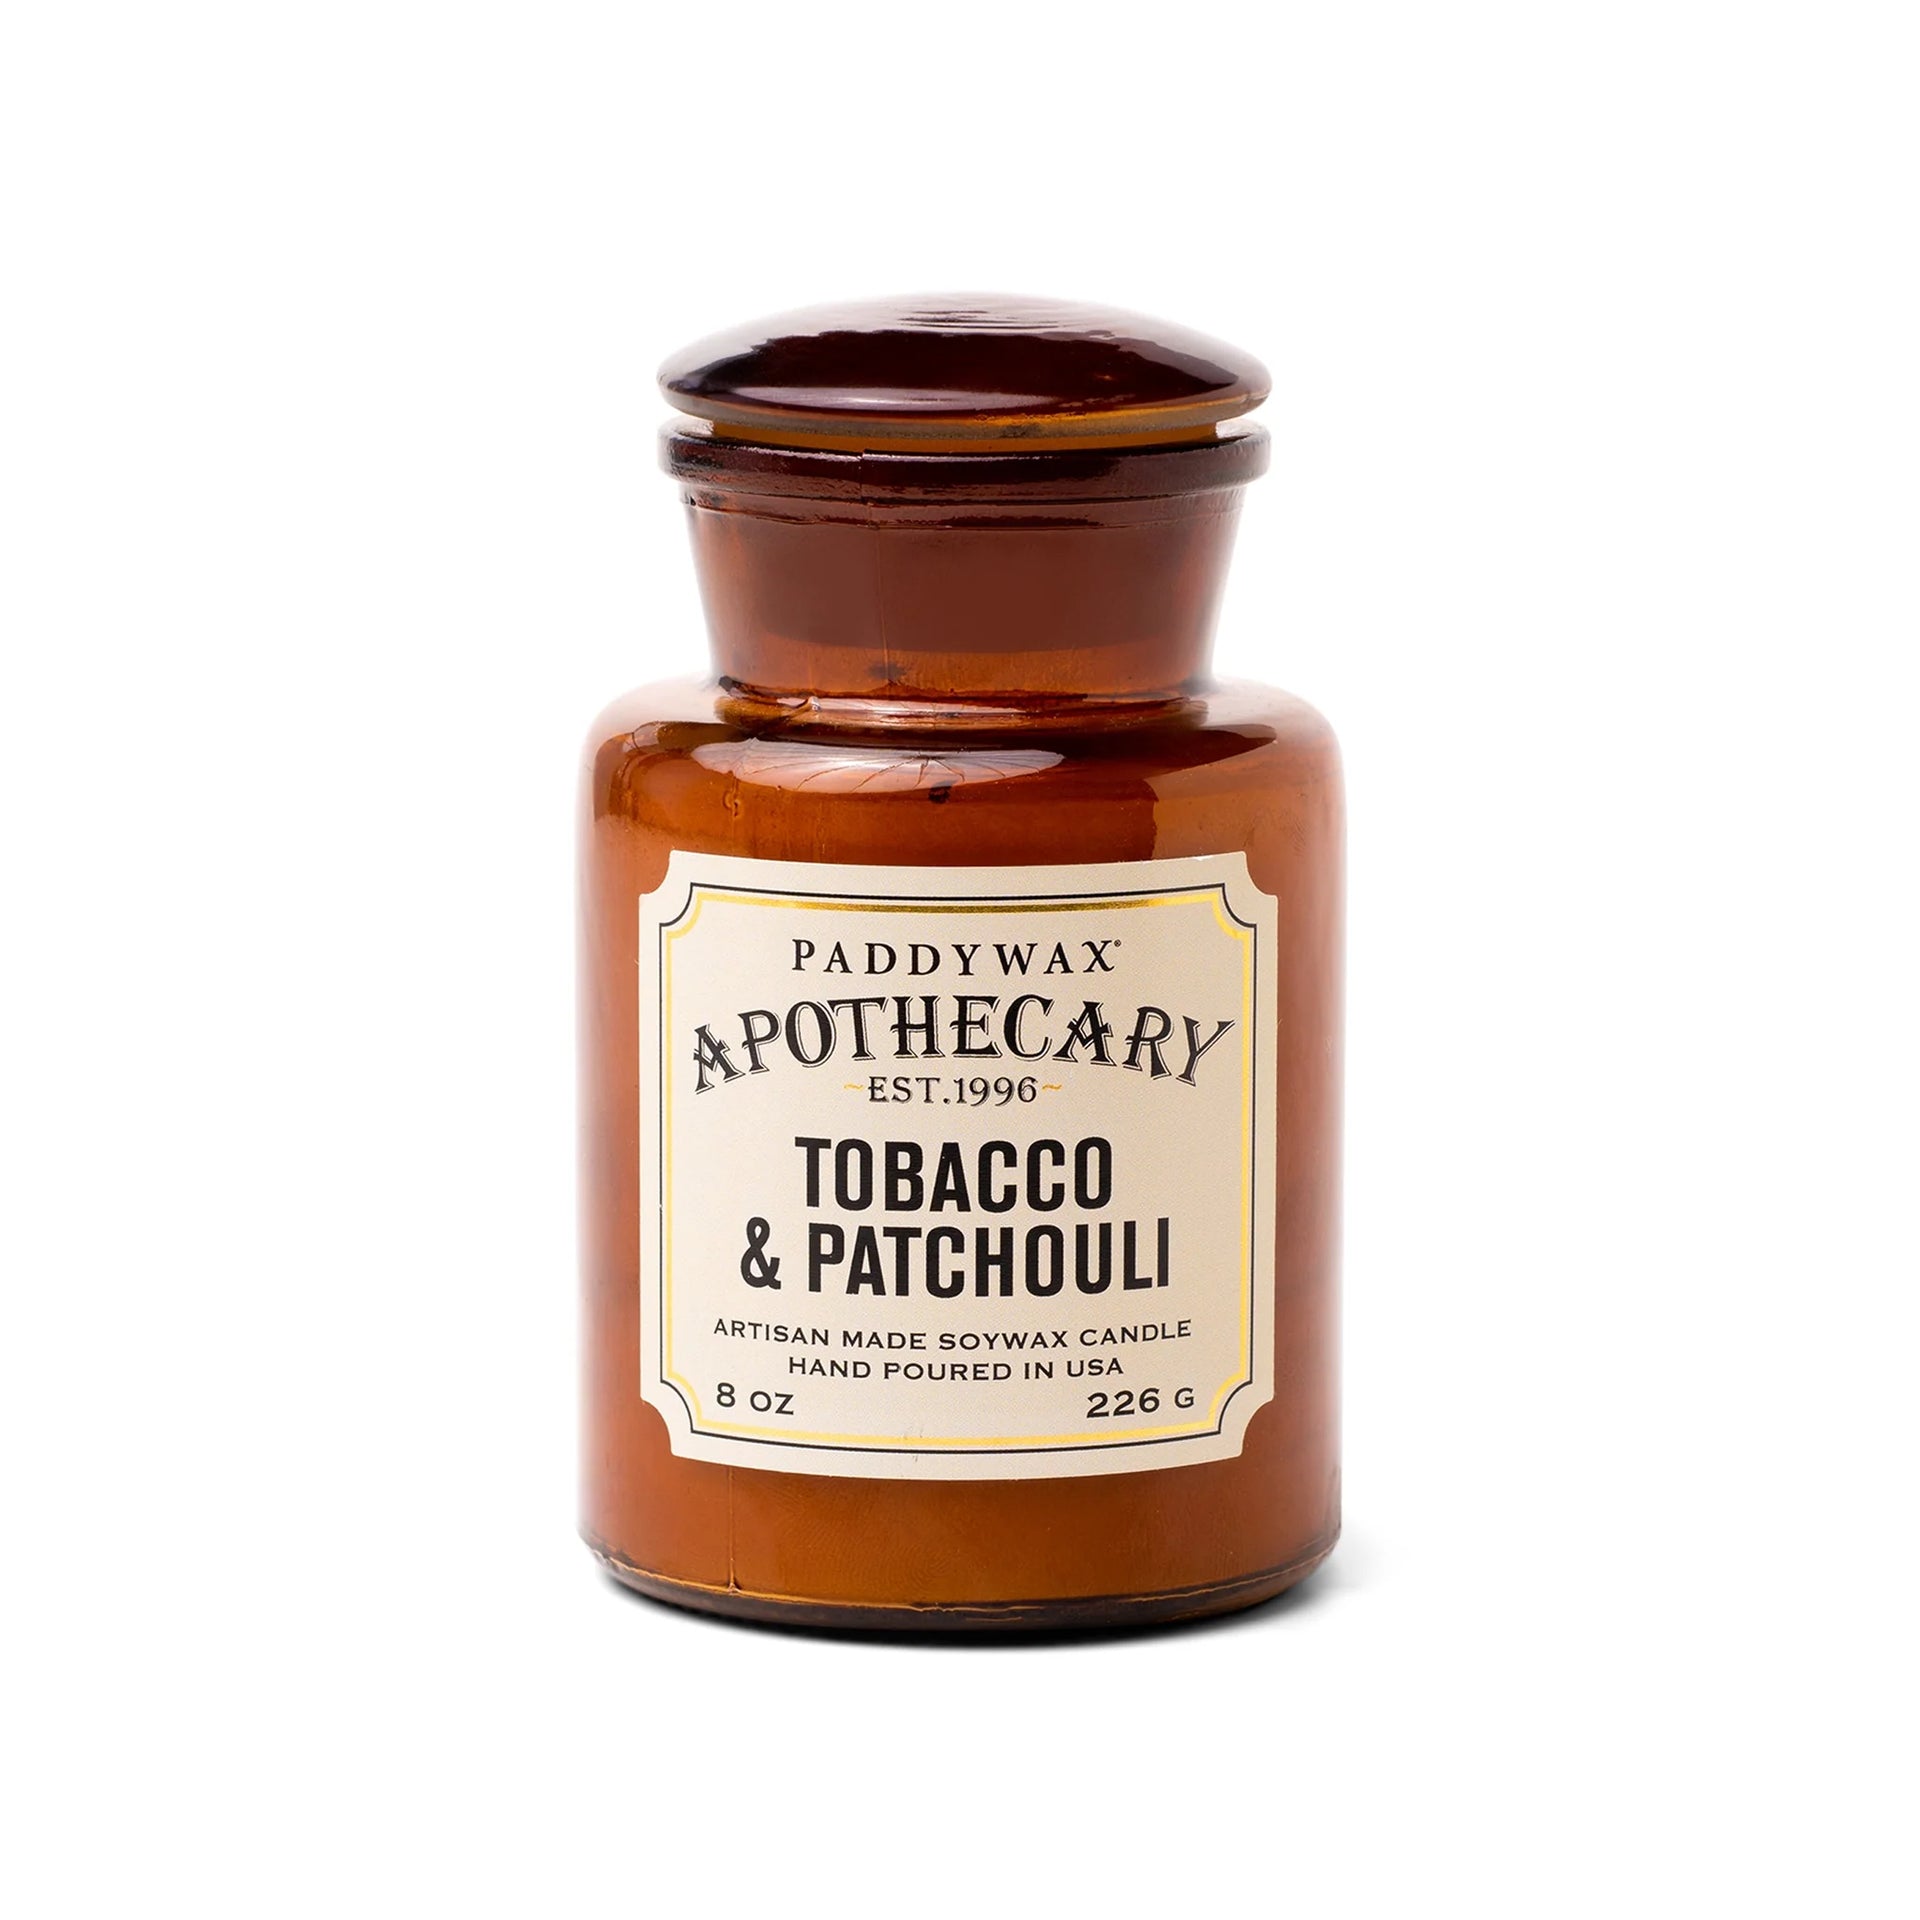 Apothecary - Tobacco & Patchouli  Paddywax   